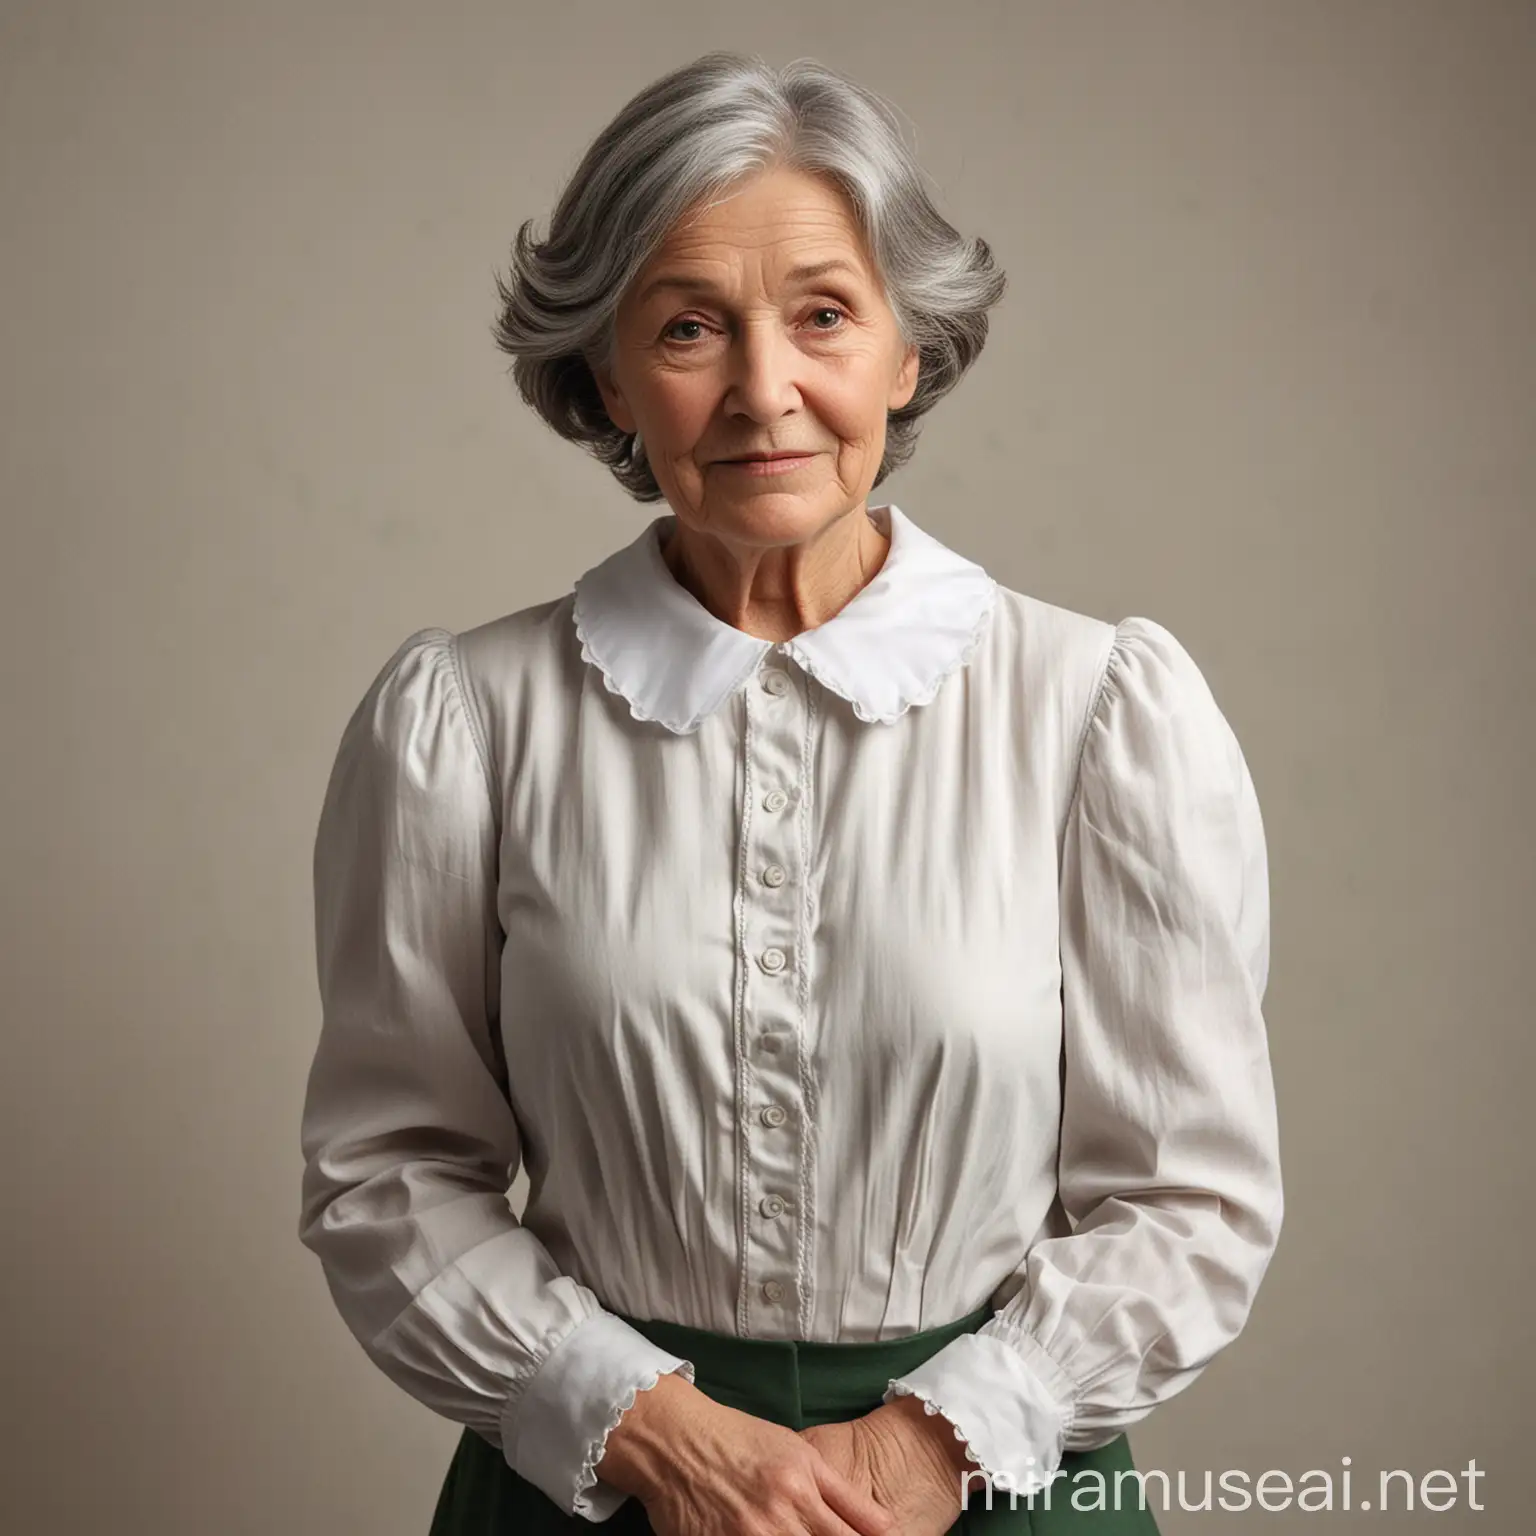 Independent Elderly Woman with Gray and Brunette Pageboy Haircut in White Blouse with Peter Pan Collar